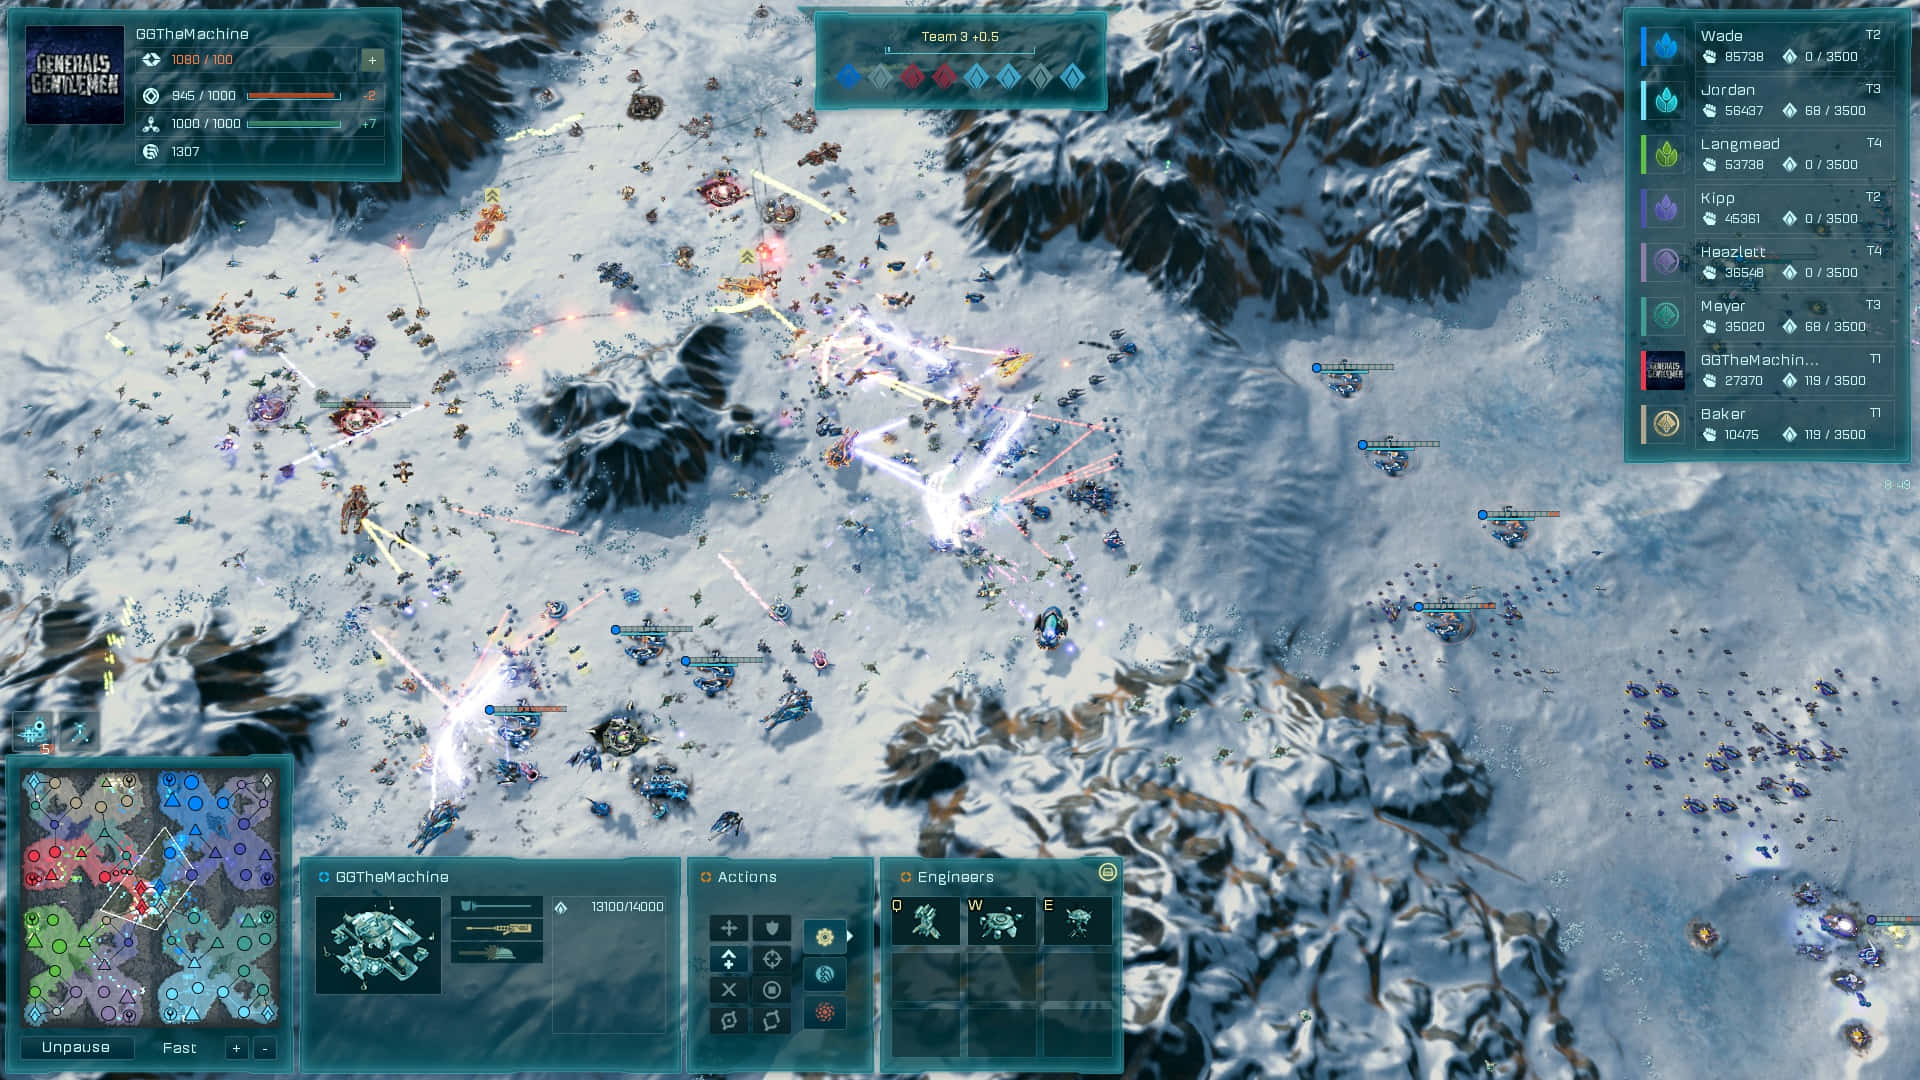 A Screenshot Of A Game With A Snowy Scene